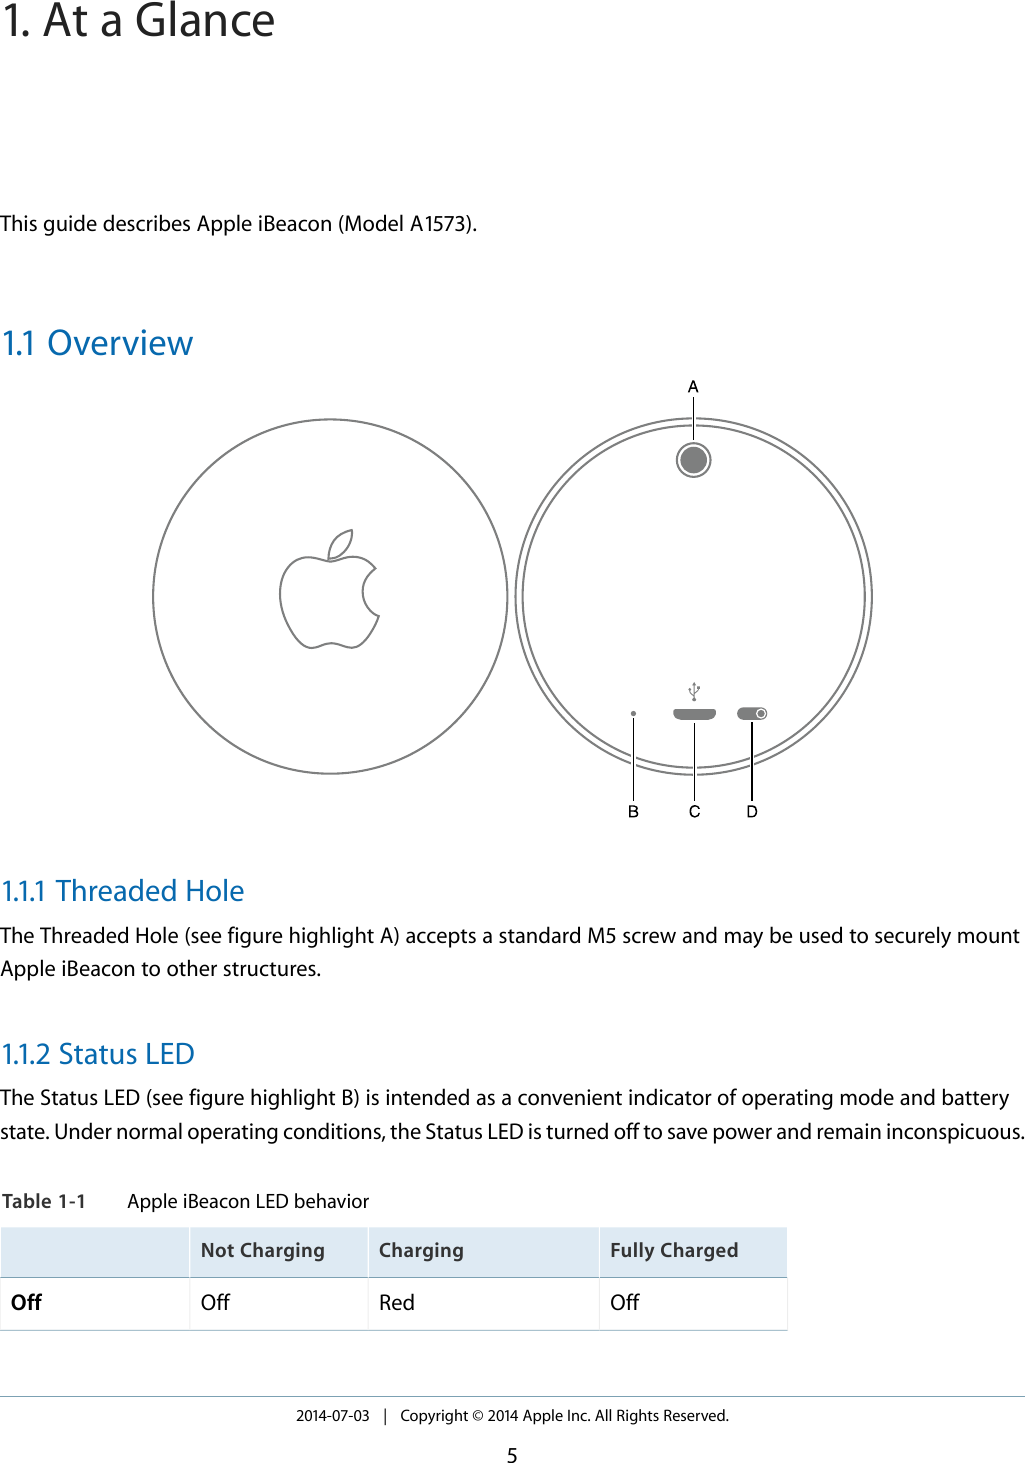 This guide describes Apple iBeacon (Model A1573).1.1 Overview1.1.1 Threaded HoleThe Threaded Hole (see figure highlight A) accepts a standard M5 screw and may be used to securely mountApple iBeacon to other structures.1.1.2 Status LEDThe Status LED (see figure highlight B) is intended as a convenient indicator of operating mode and batterystate. Under normal operating conditions, the Status LED is turned off to save power and remain inconspicuous.Table 1-1 Apple iBeacon LED behaviorFully ChargedChargingNot ChargingOffRedOffOff2014-07-03   |   Copyright © 2014 Apple Inc. All Rights Reserved.51. At a Glance